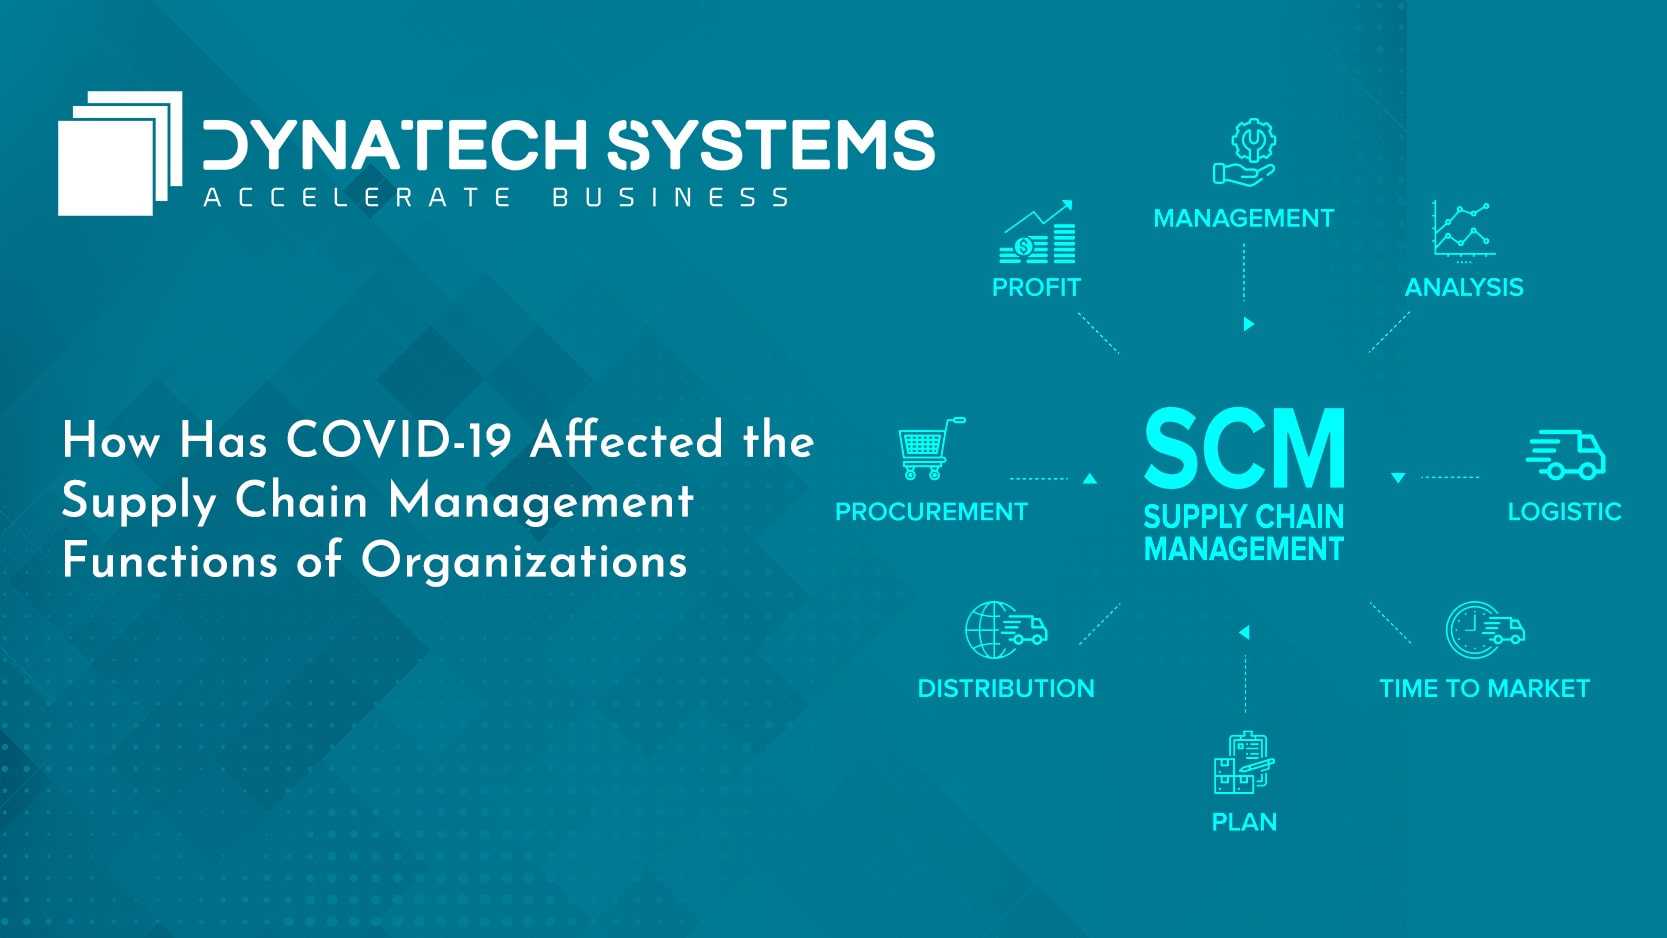 How Has COVID-19 Affected the Supply Chain Management Functions of Organizations